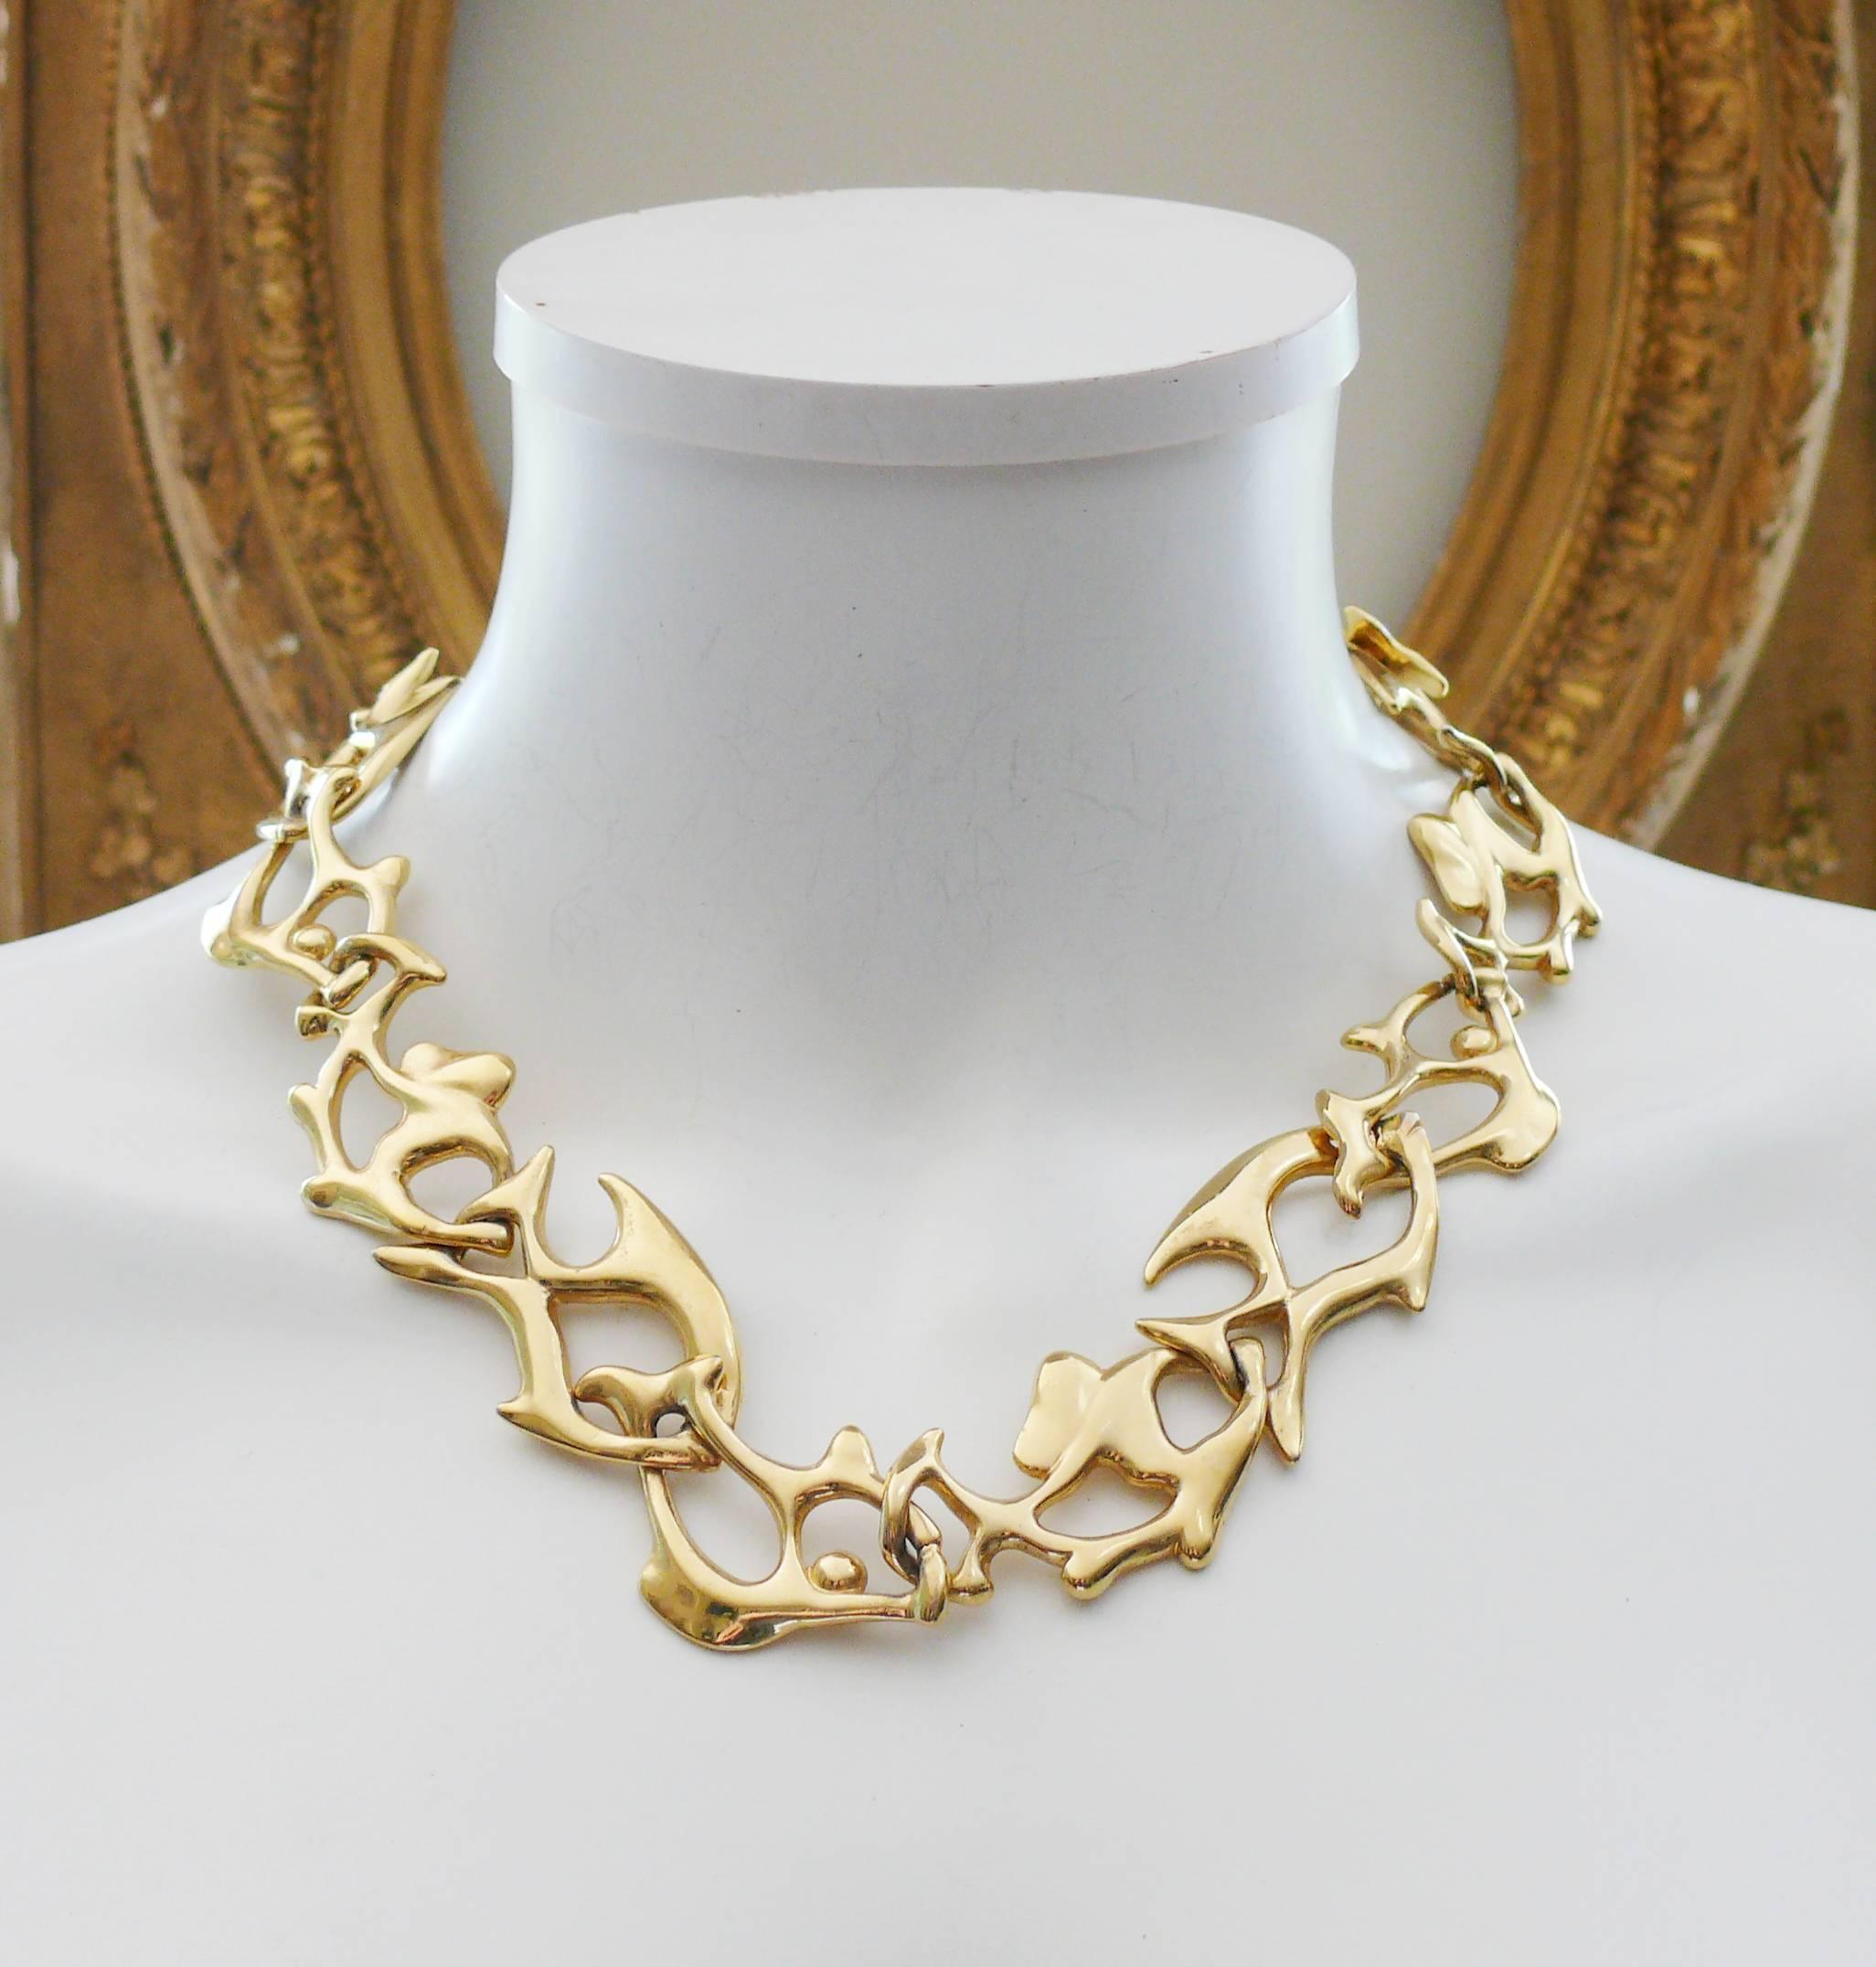 YVES SAINT LAURENT vintage gold toned necklace featuring fish links.

Embossed YSL Made in France.
Numbered E0.

Indicative measurements : adjustable length from approx. 46 cm (18.11 inches) to approx. 50 cm (19.69 inches) / width approx. 2.7 cm